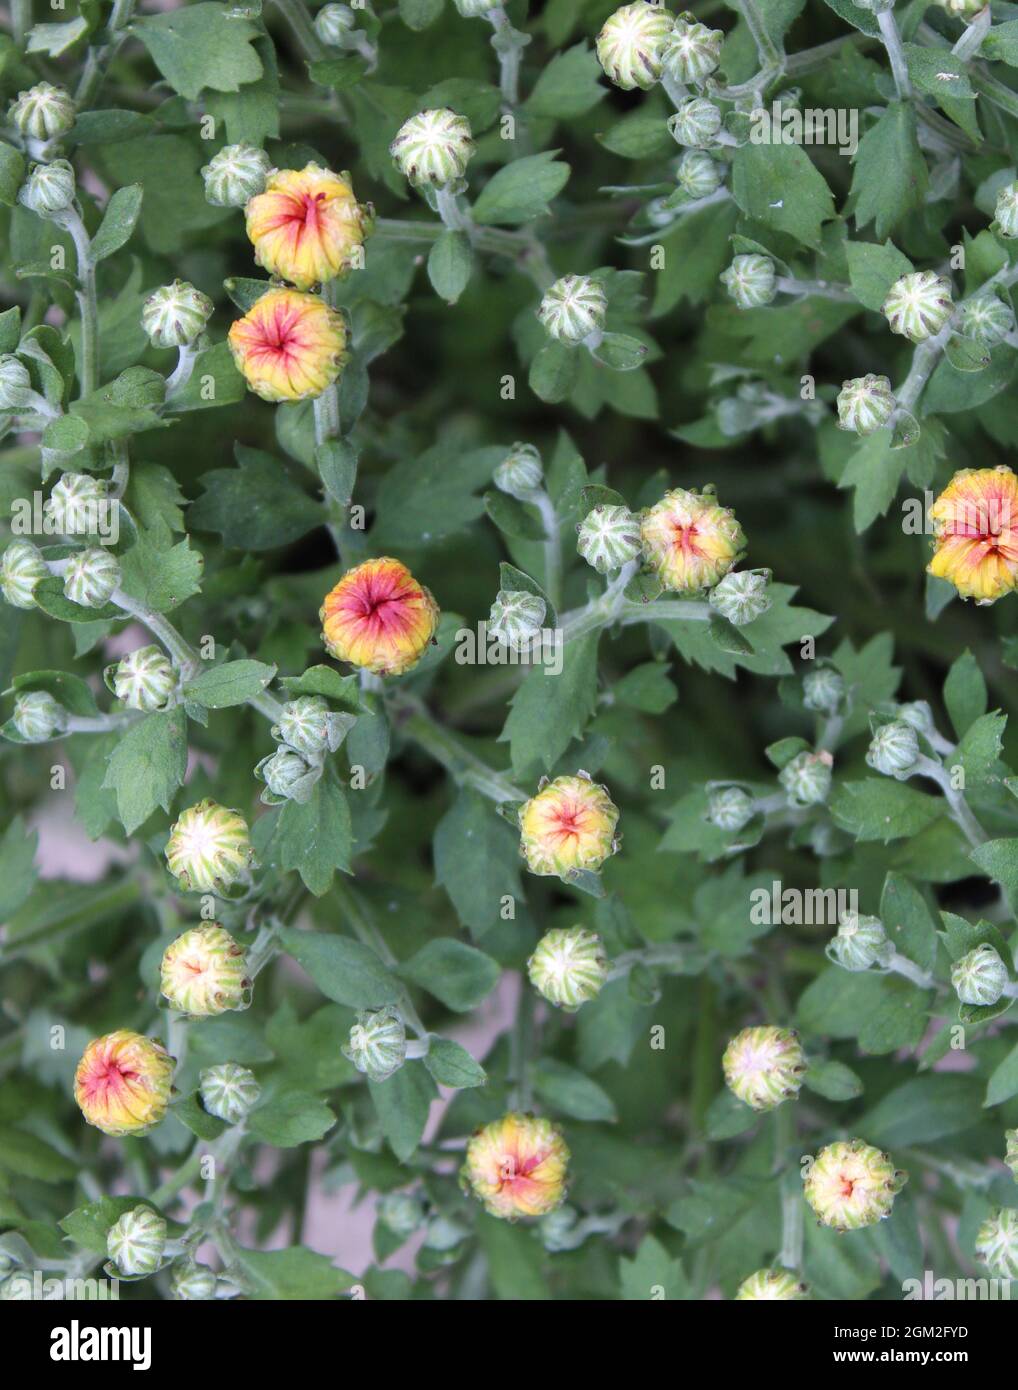 Small Buds on a Chrysanthemum Plant Stock Photo